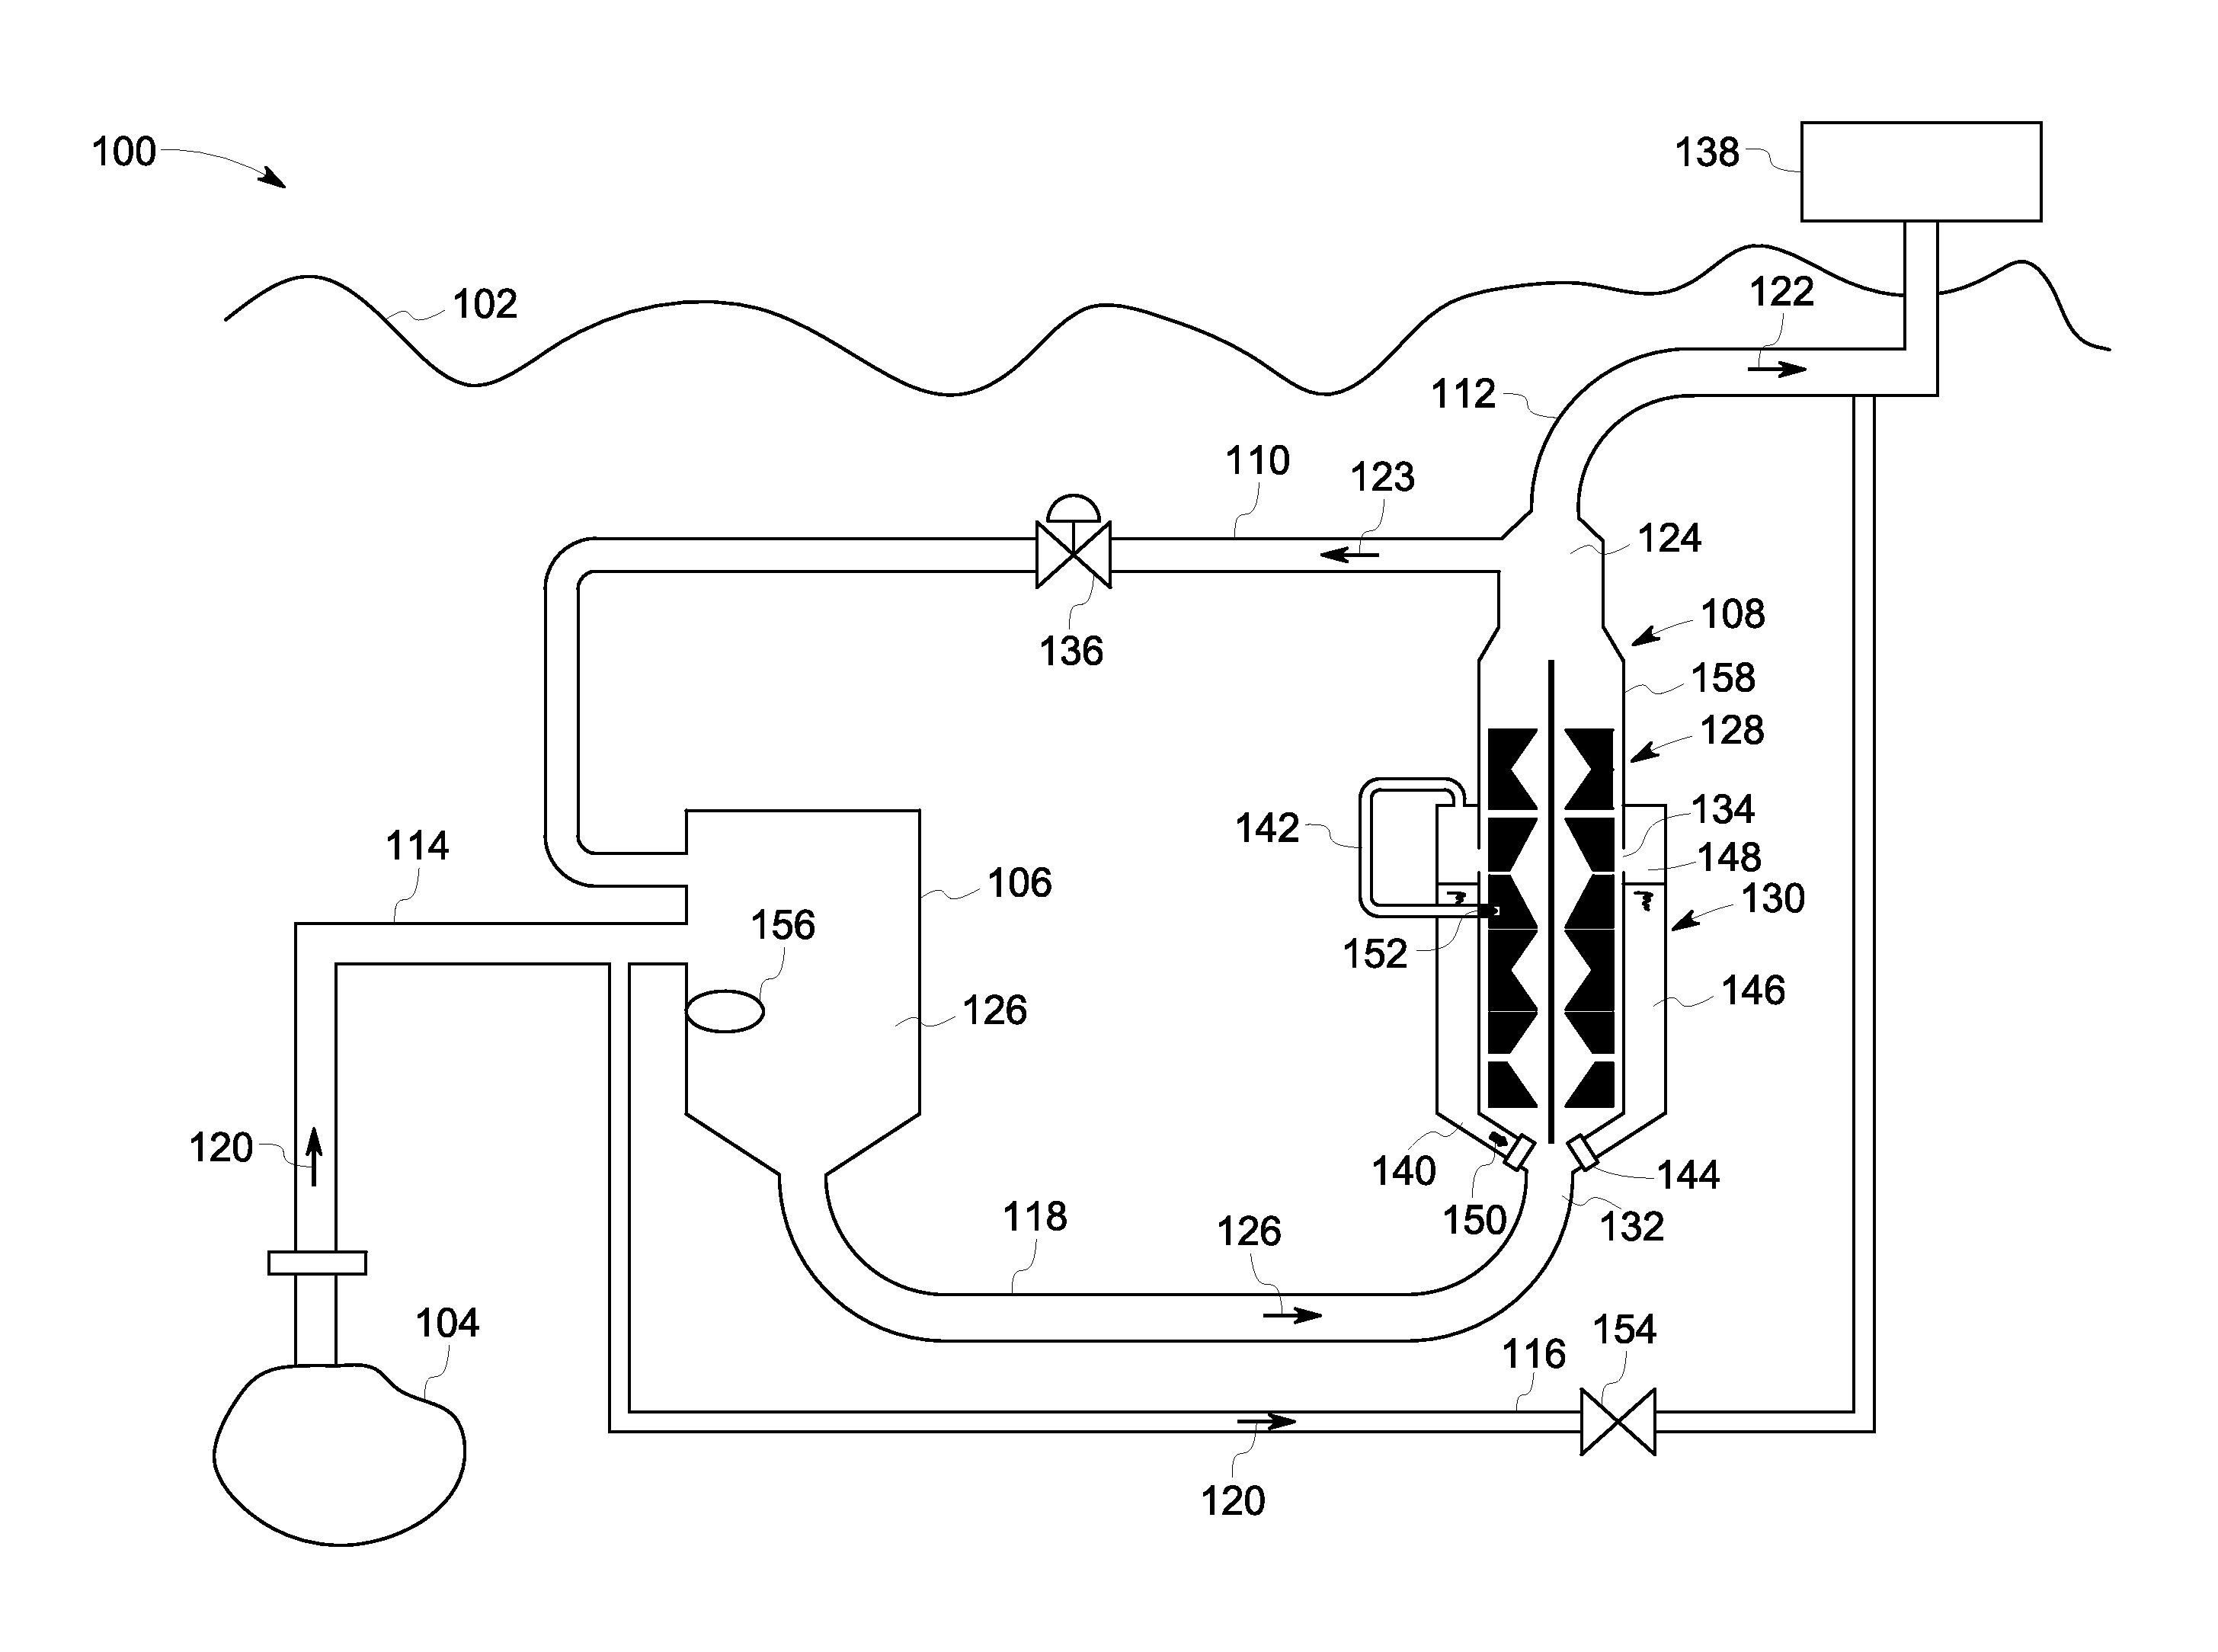 Subsea fluid processing system with intermediate re-circulation